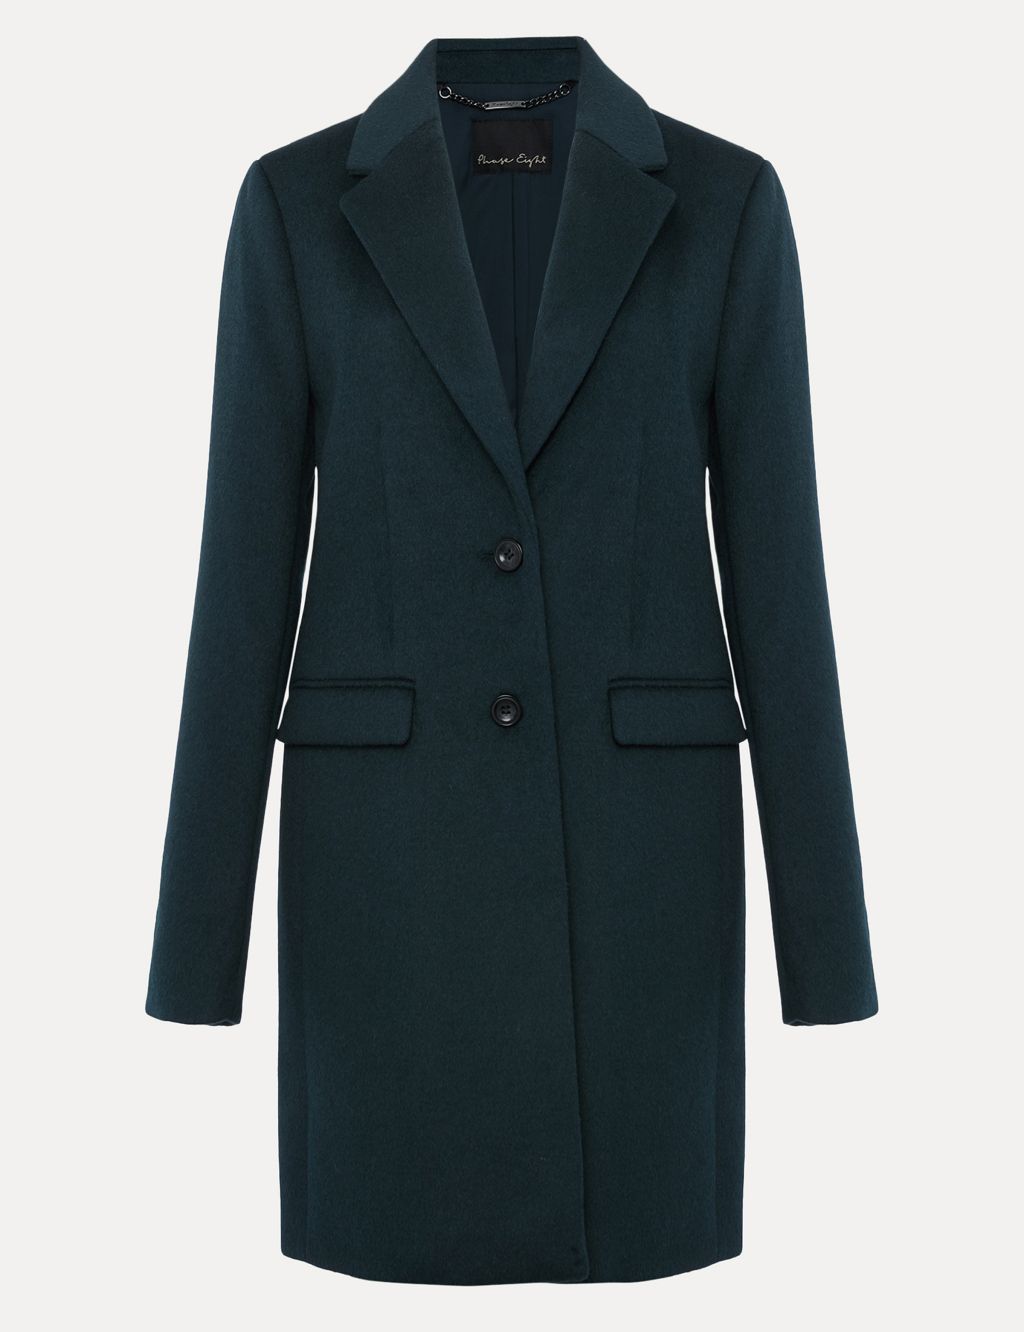 Buy Wool Blend Collared Tailored Coat | Phase Eight | M&S